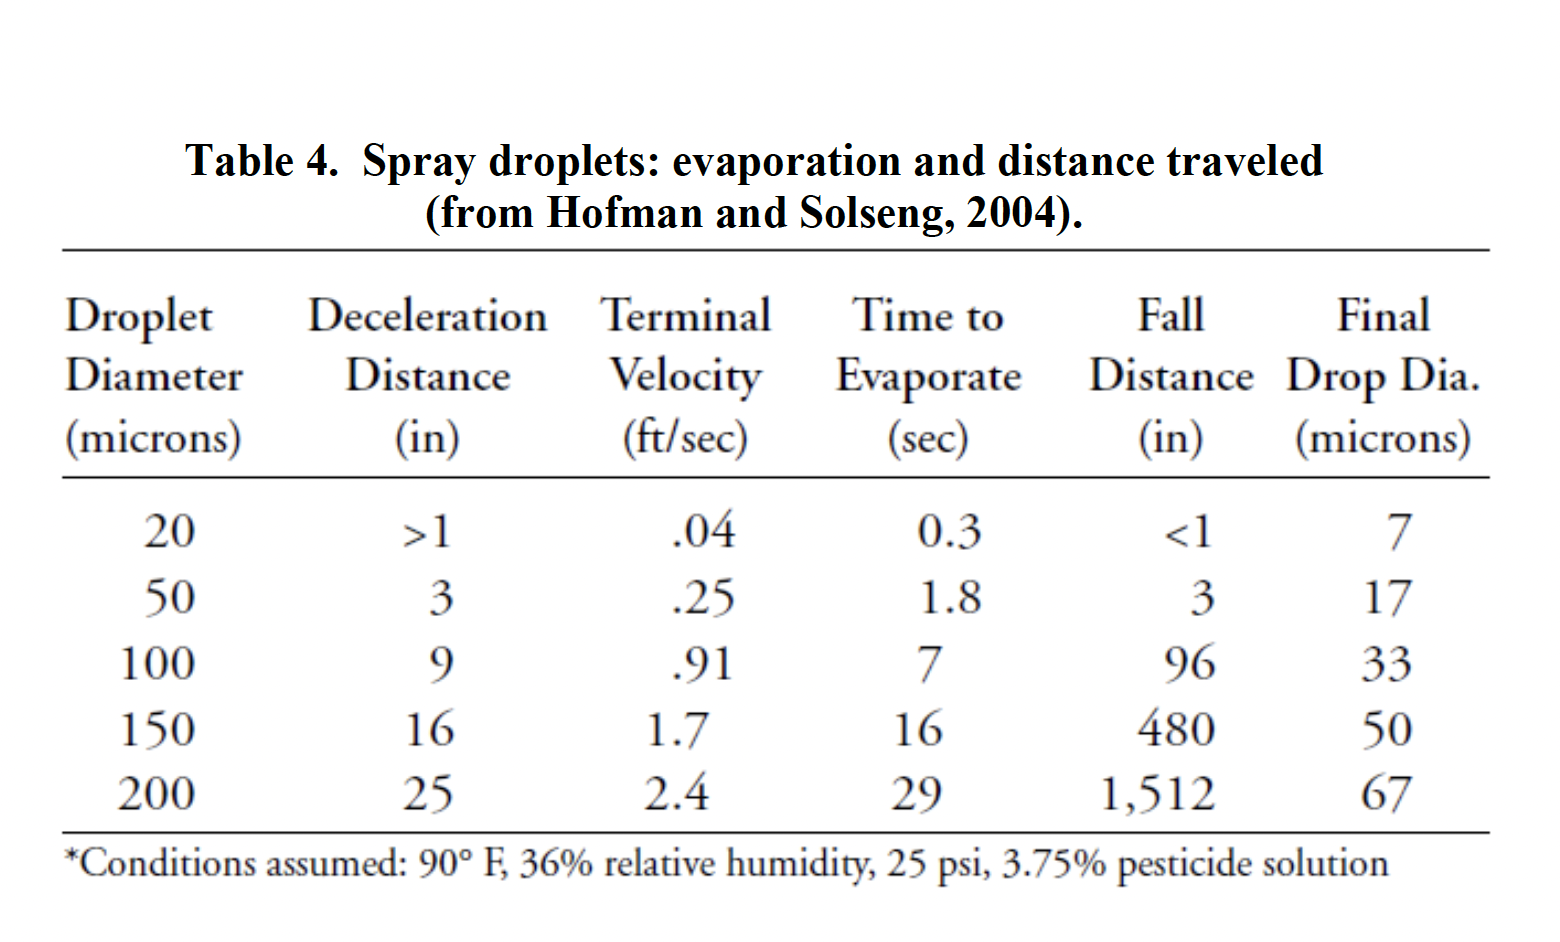 Table 4 of Spray droplets: evaporation and distance traveled 